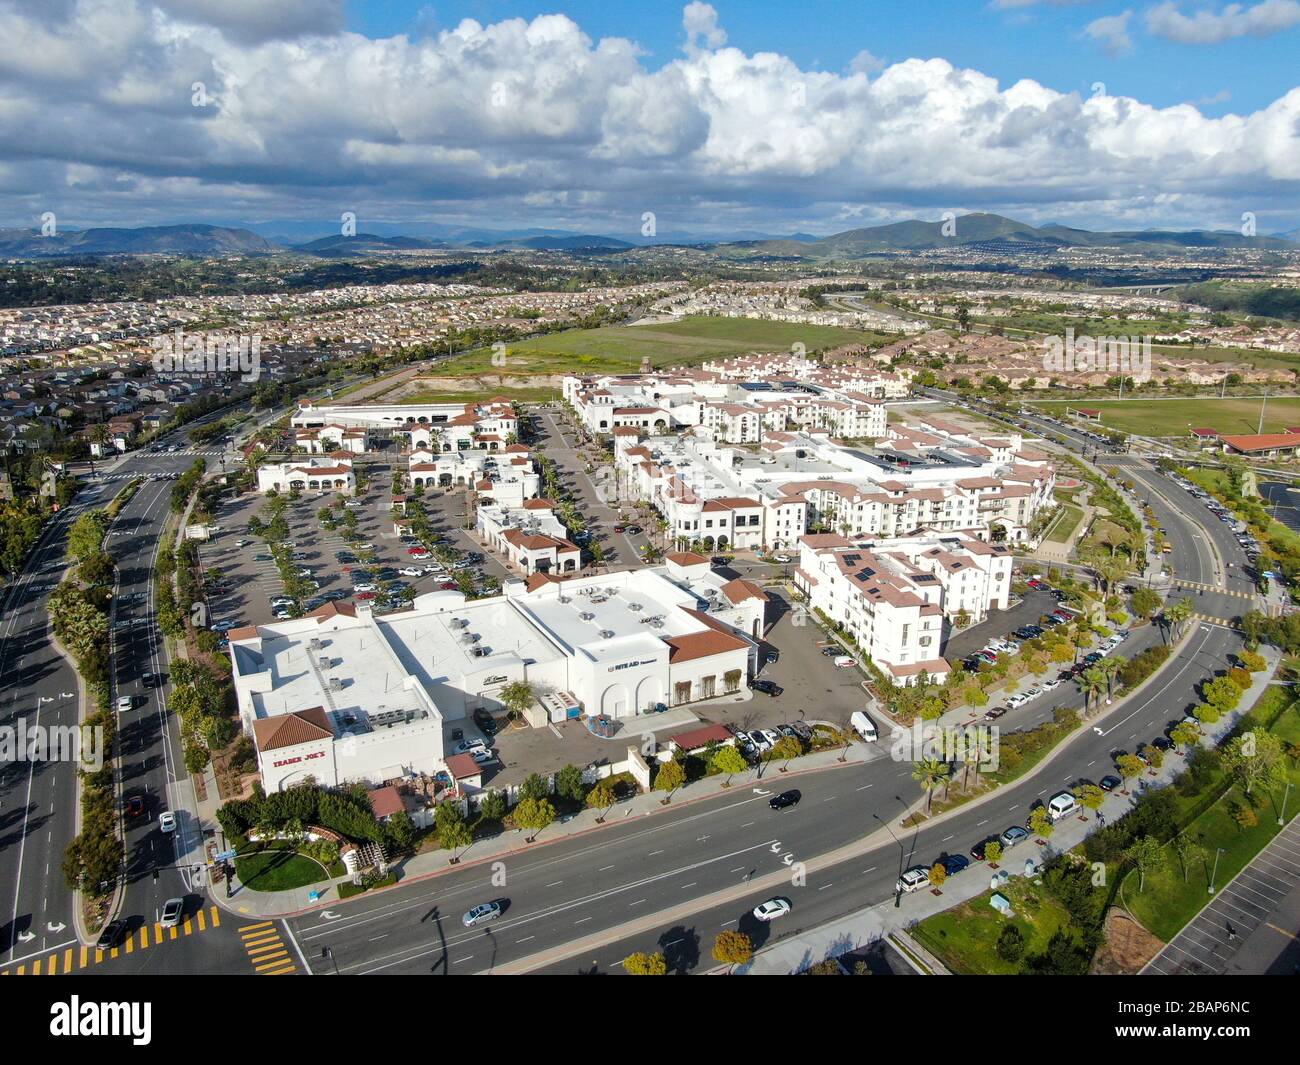 Aerial view of typical small town shopping center with parking . Carmel  Valley, San Diego, California, USA. March 28th, 2020 Stock Photo - Alamy